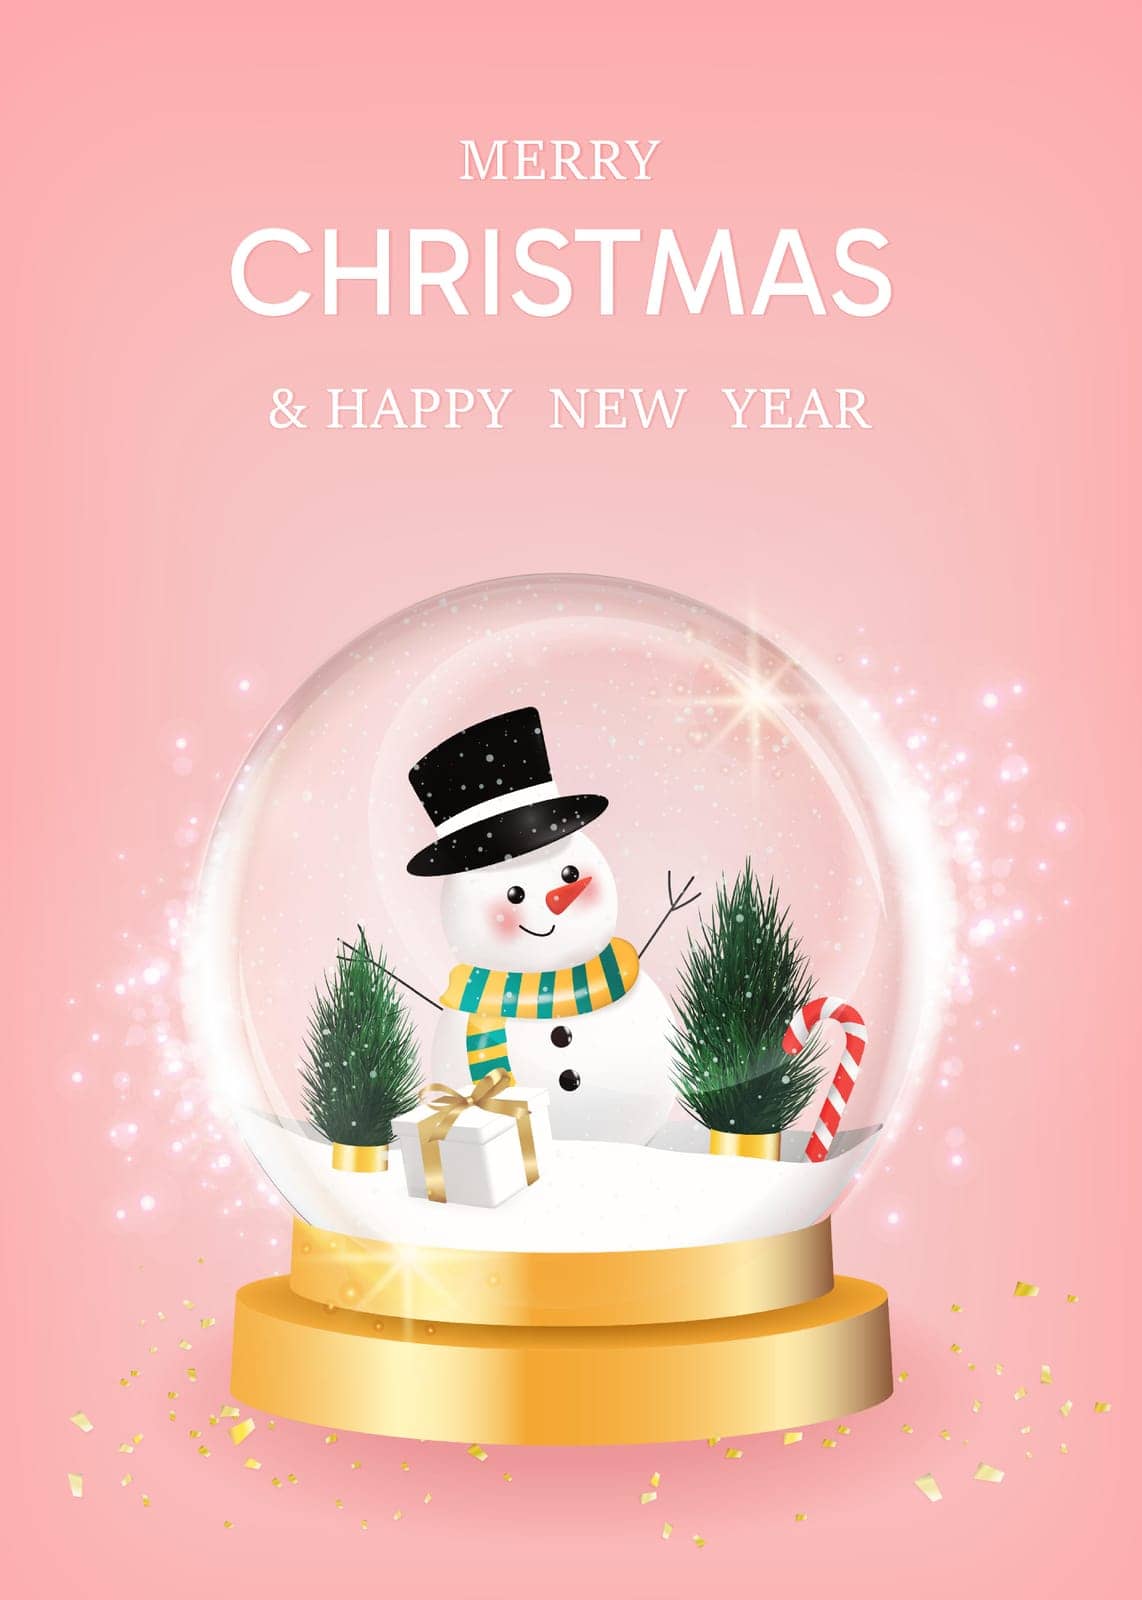 Merry Christmas and Happy New Year. Christmas winter snow glass ball, transparent dome. design Xmas green tree in snow, gift box, snowman. Vector illustration.